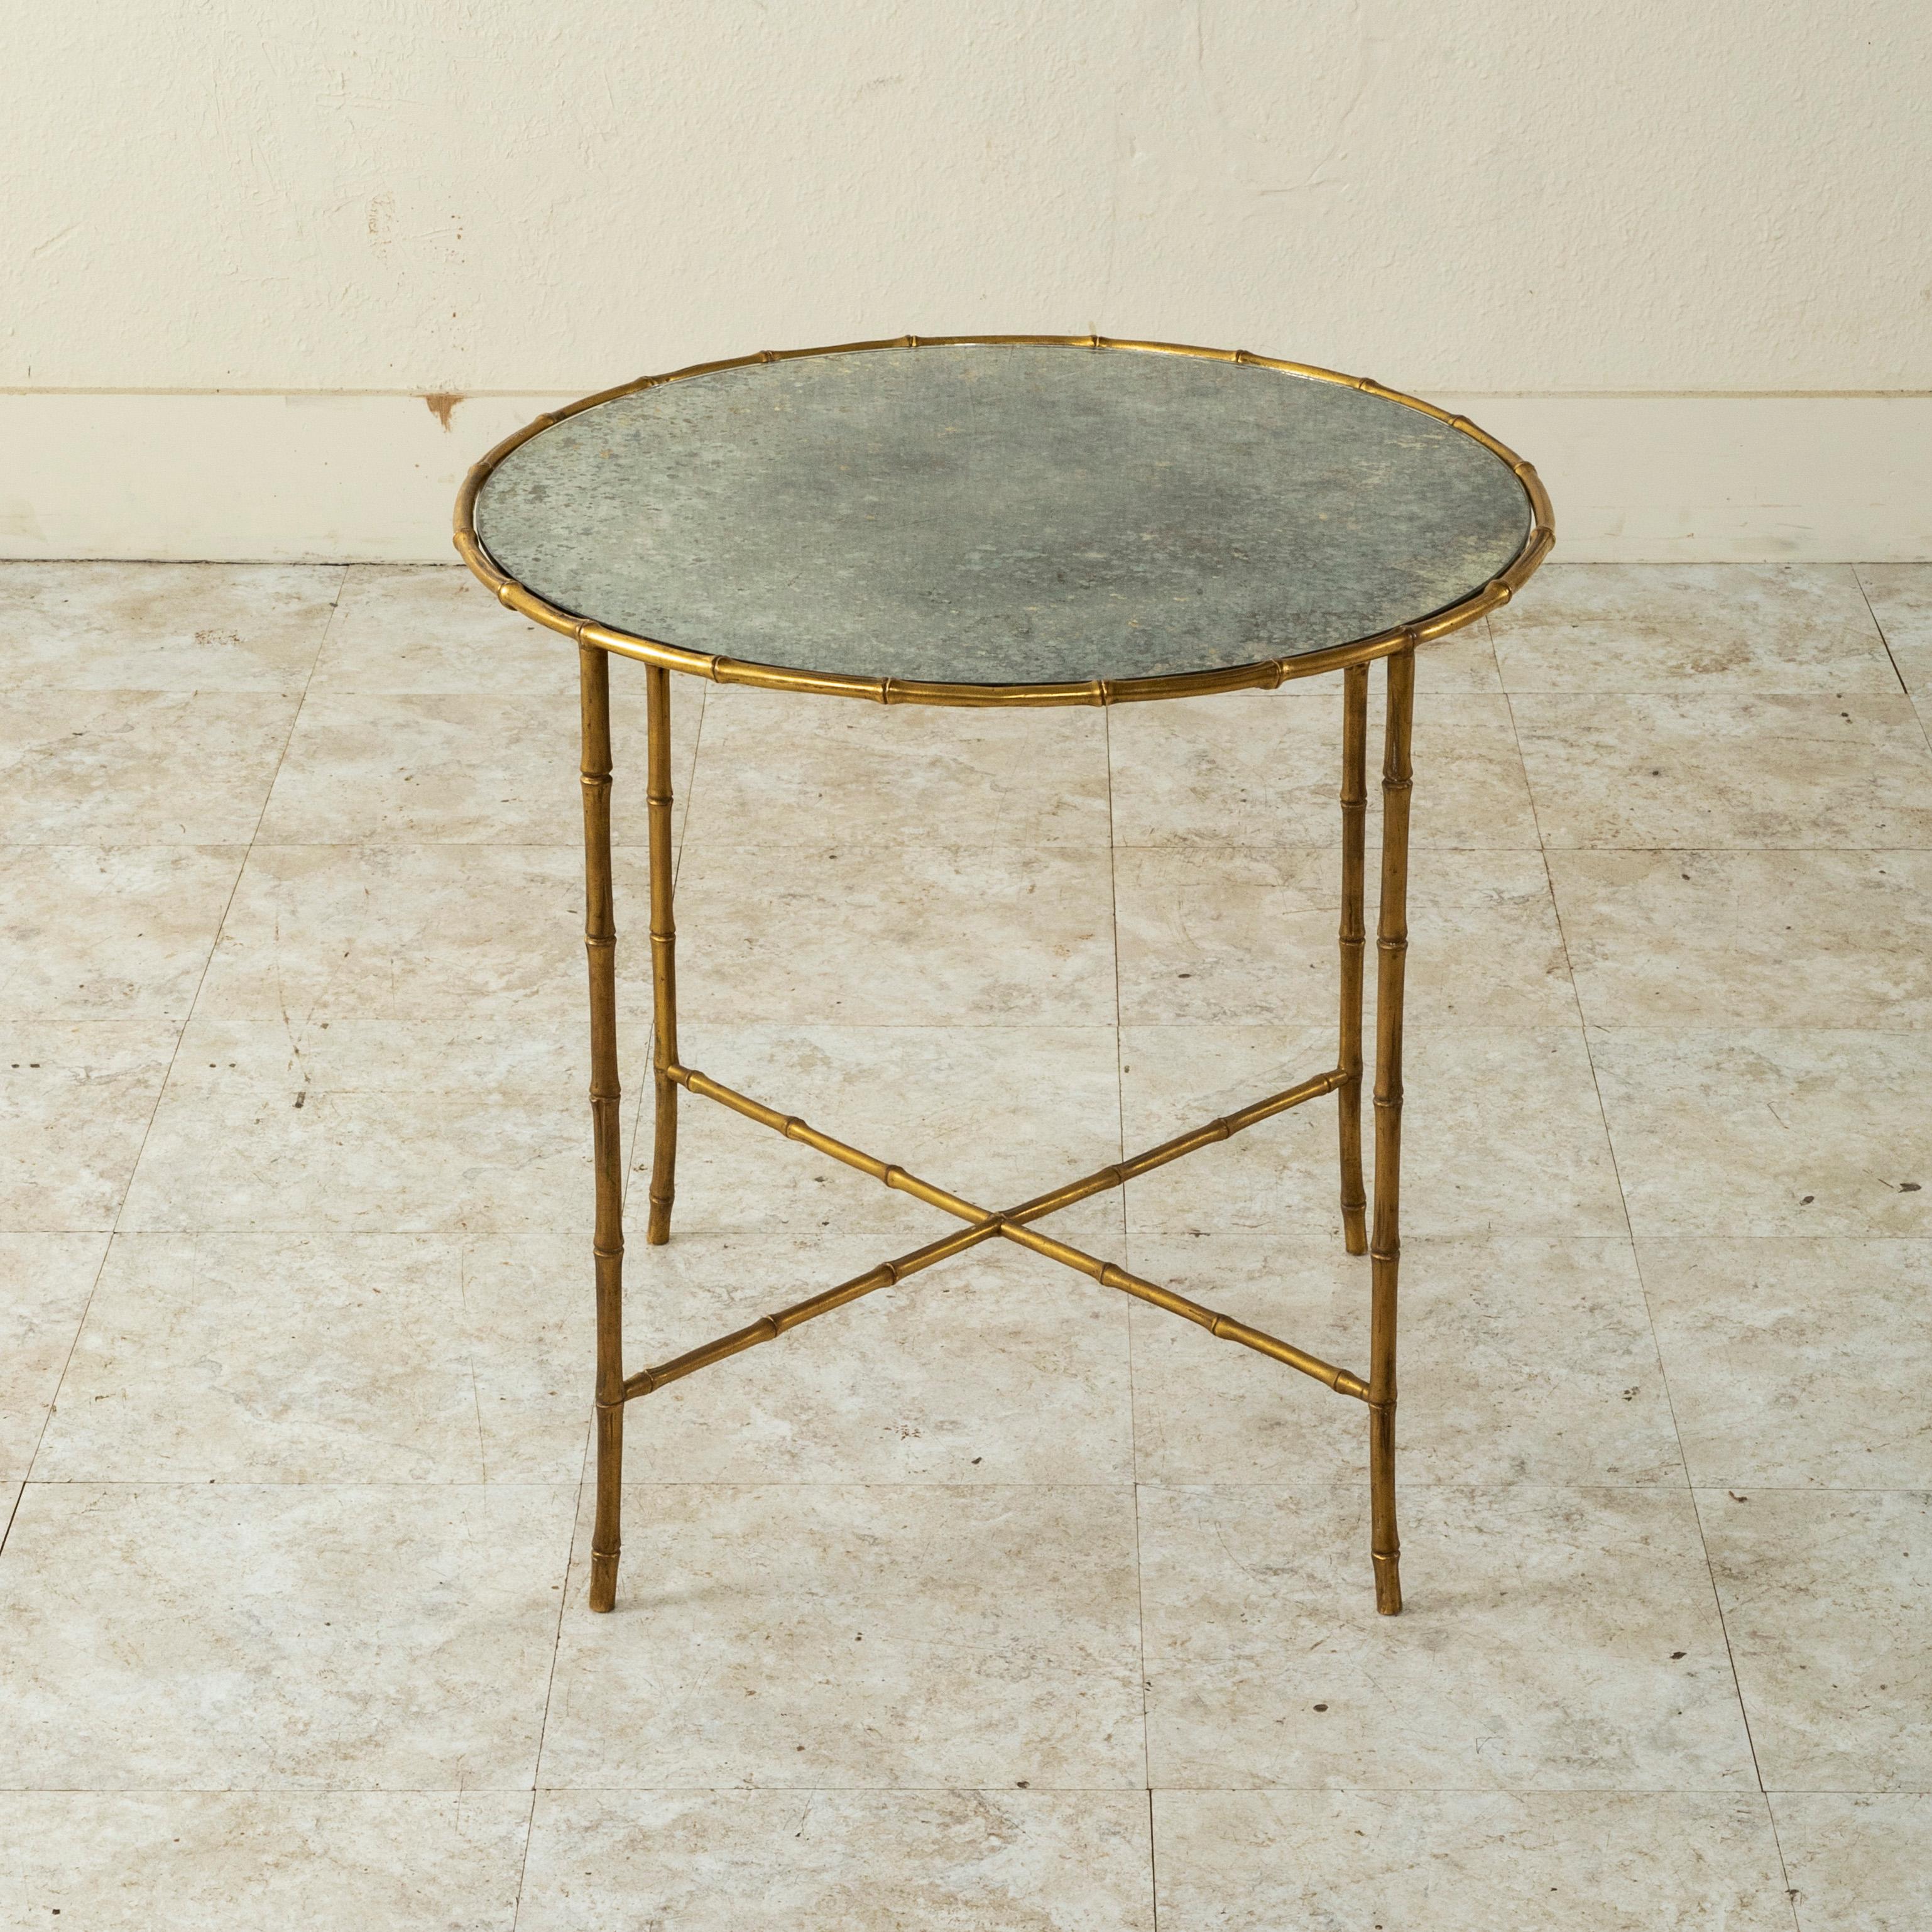 This mid-century French Maison Bagues round side table or coffee table features a faux bamboo bronze frame. The table is fitted with its original mirrored glass top. A small scale cocktail table to mix with contemporary interiors. c. 1960.